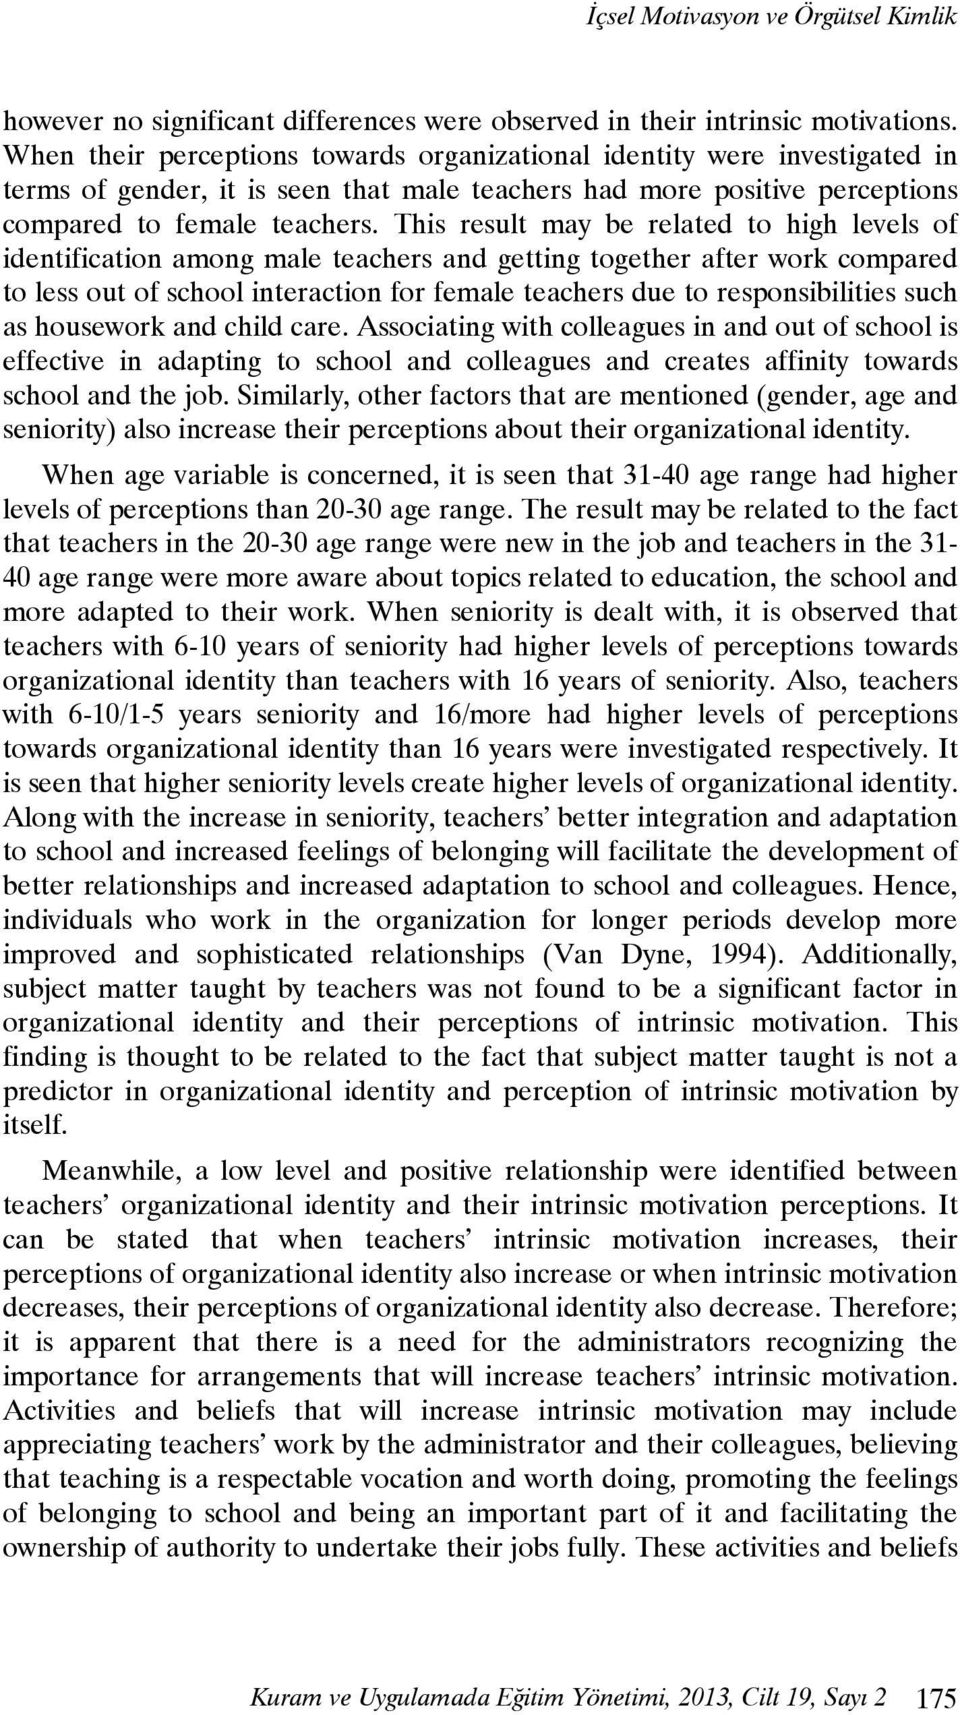 This result may be related to high levels of identification among male teachers and getting together after work compared to less out of school interaction for female teachers due to responsibilities